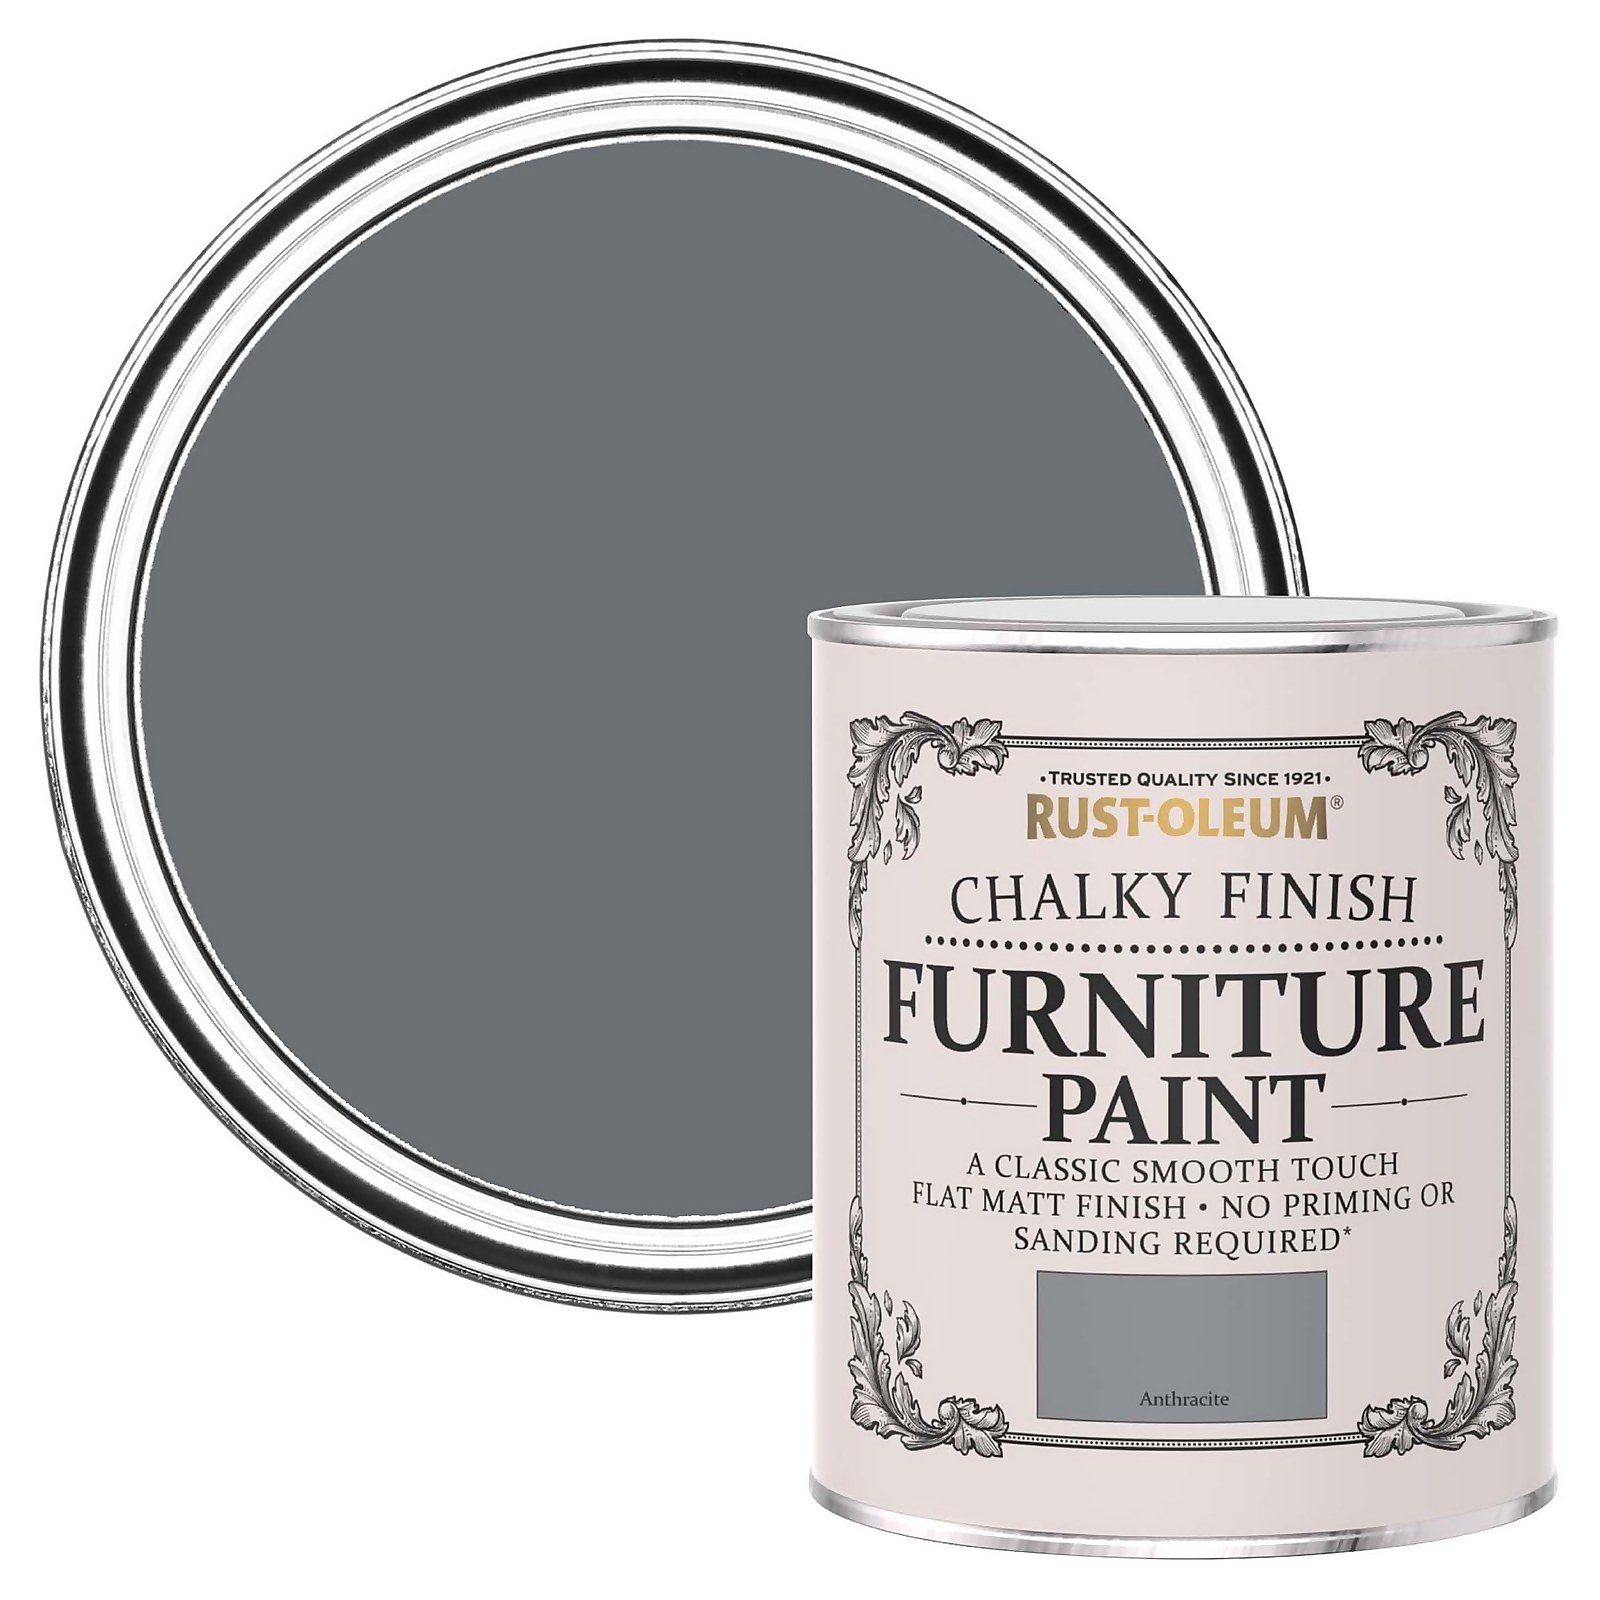 Rust-Oleum Chalky Finish Furniture Paint Anthracite - 750ml